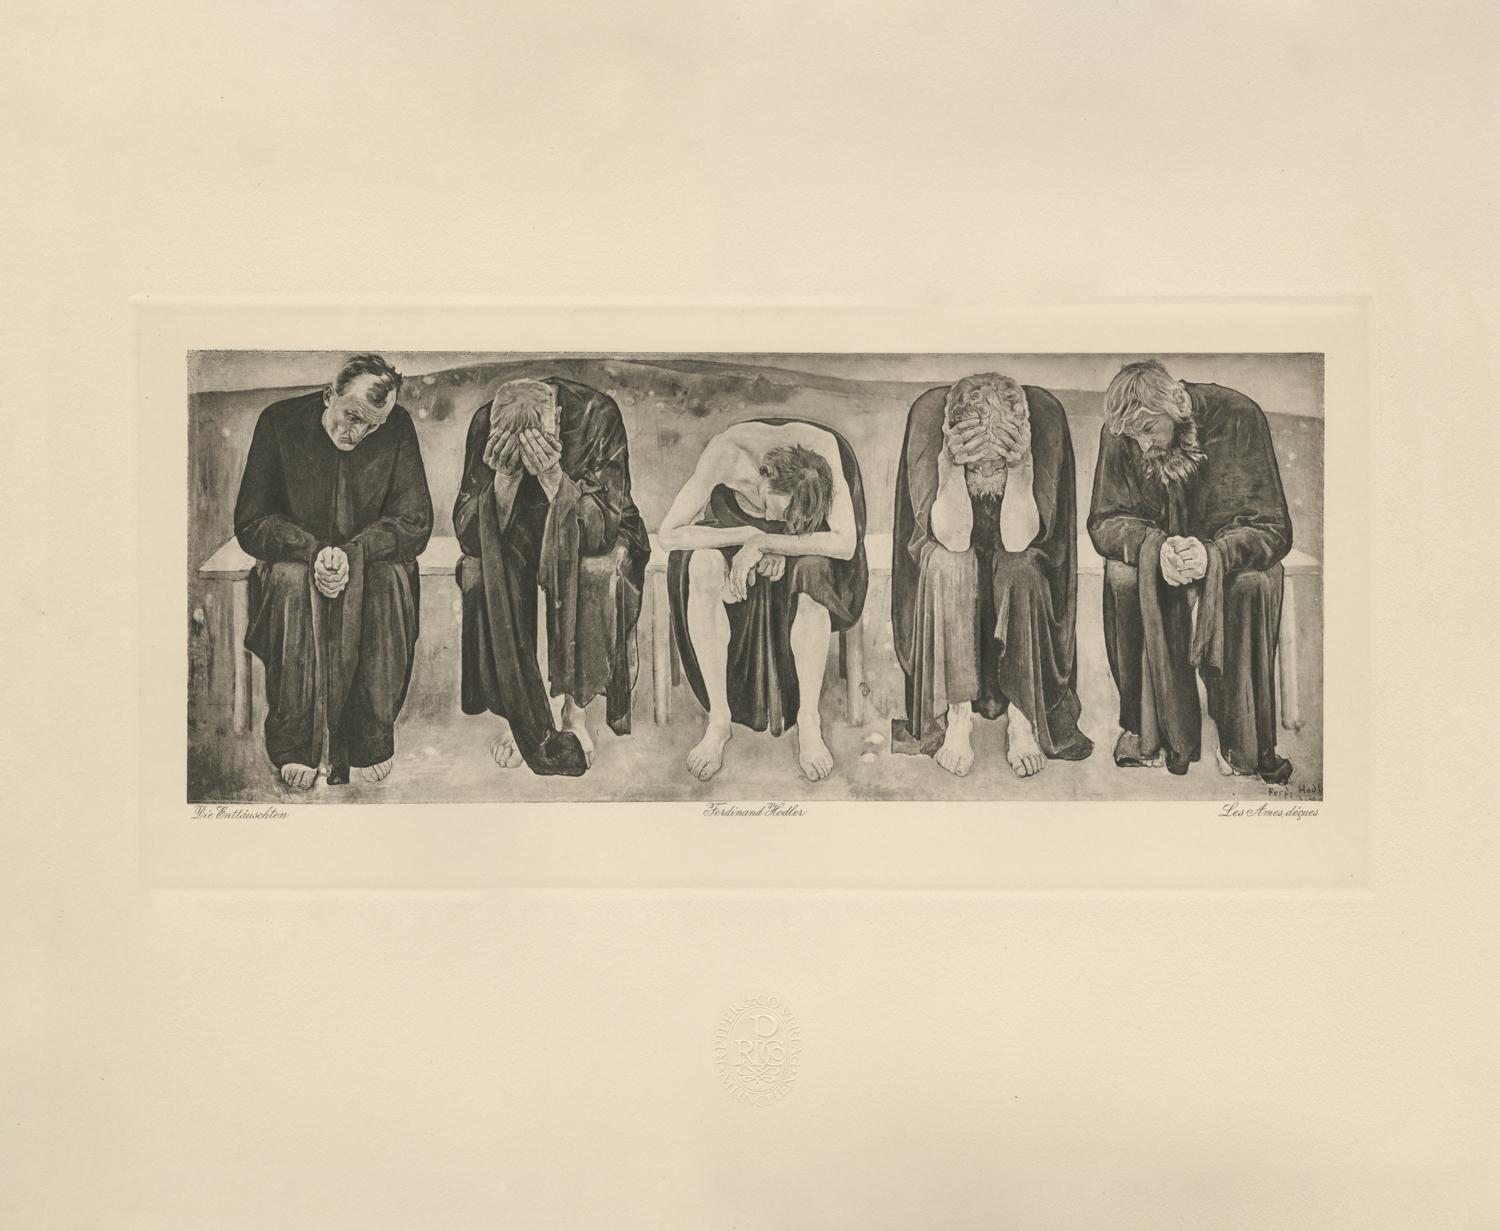 Ferdinand Hodler & R. Piper & Co. Figurative Print - "The Disappointed" Copper Plate Heliogravure